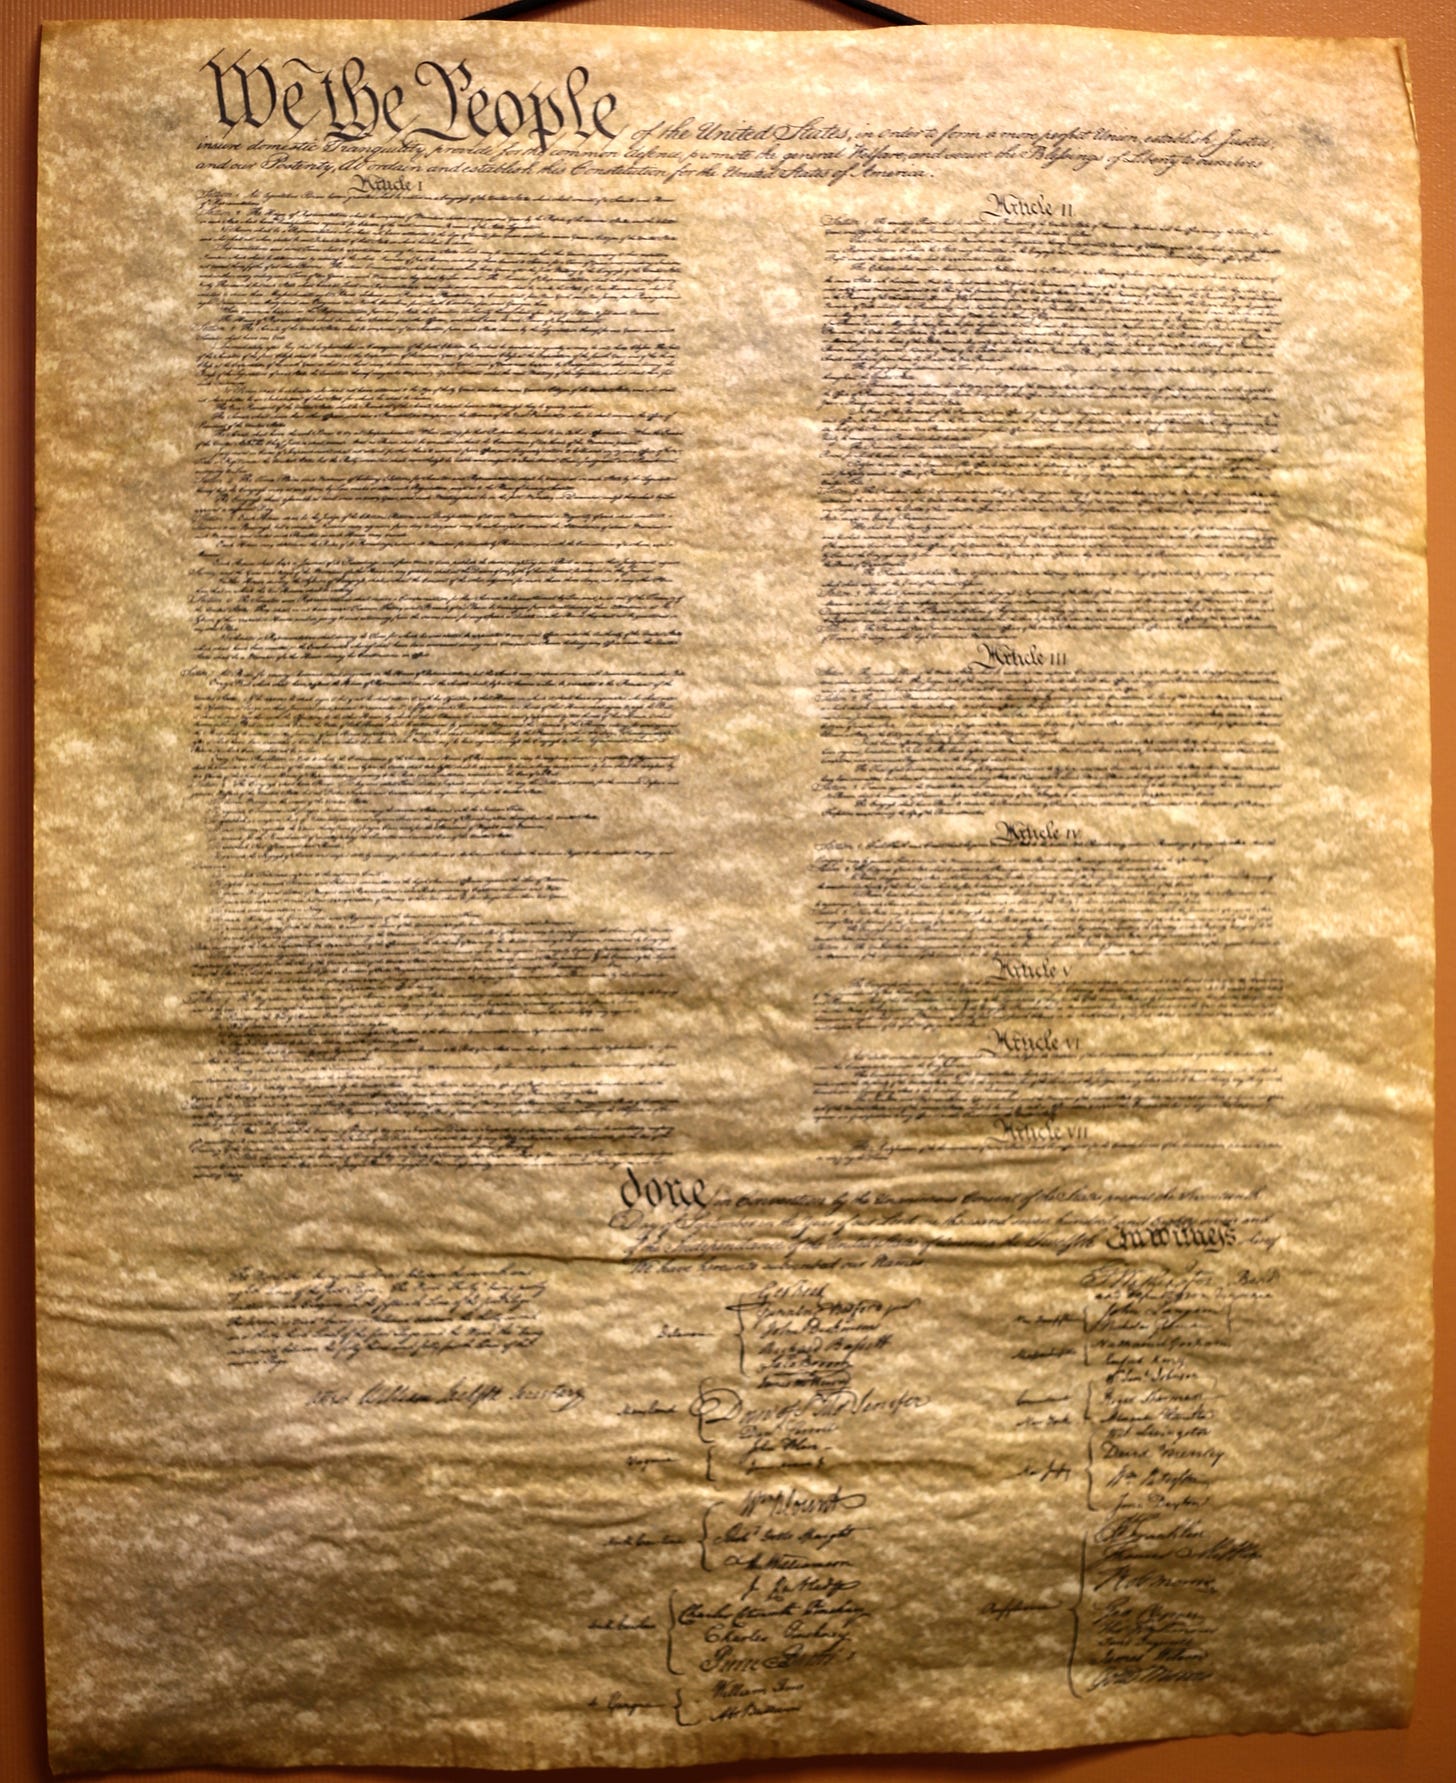 Picture of the US Constitution document